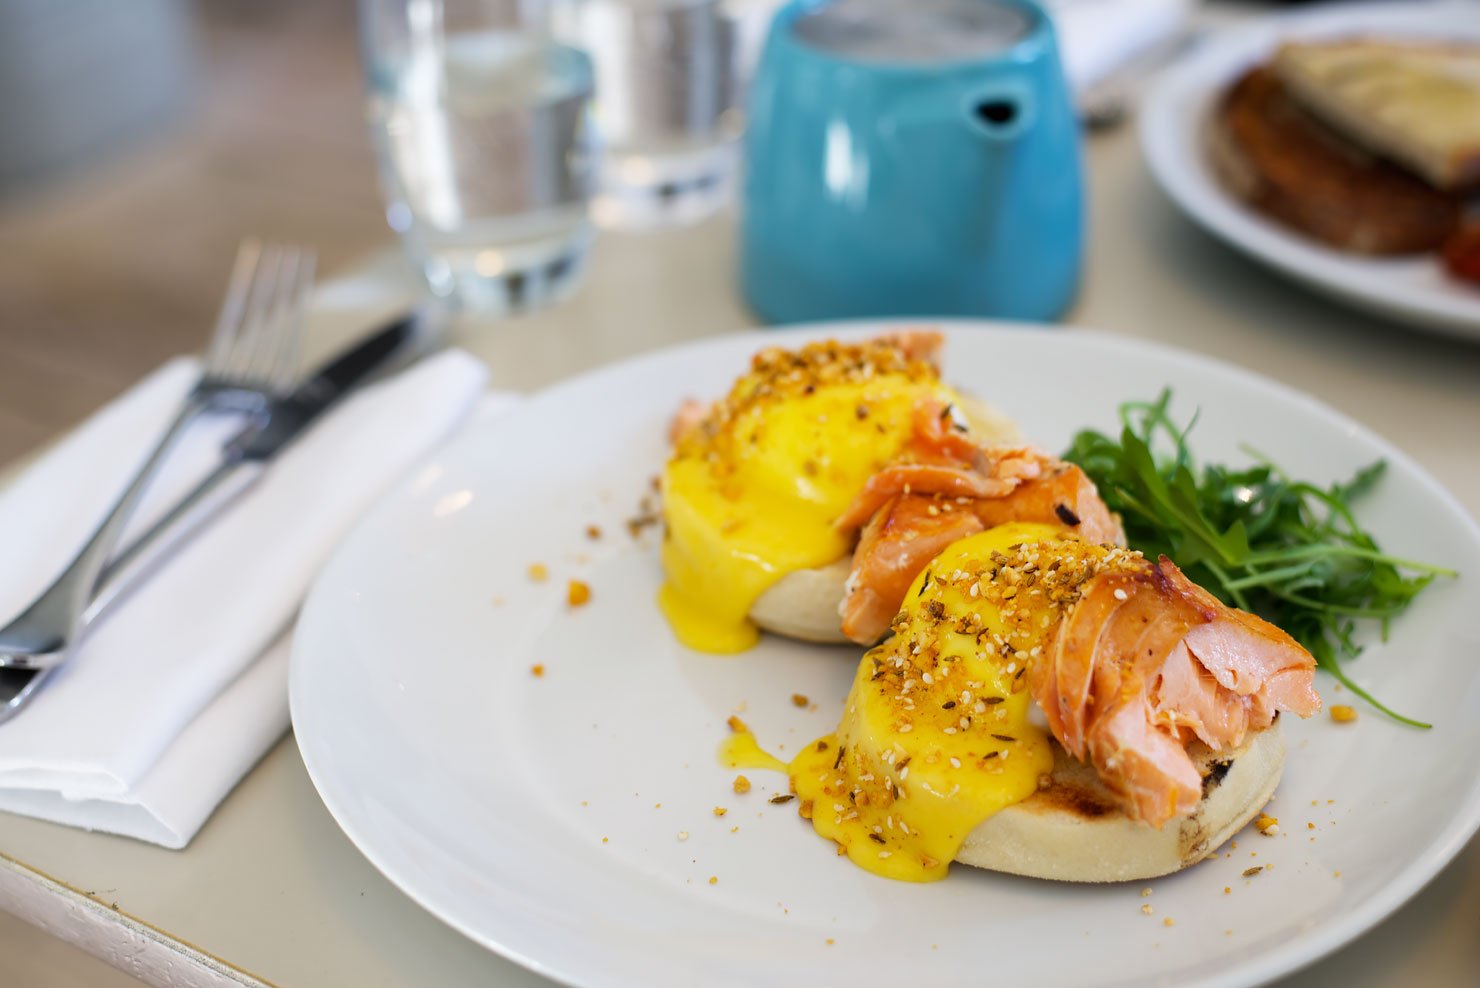 Brunch at The Modern Pantry in Clerkenwell, London. Poached eggs with tea-smoked salmon.